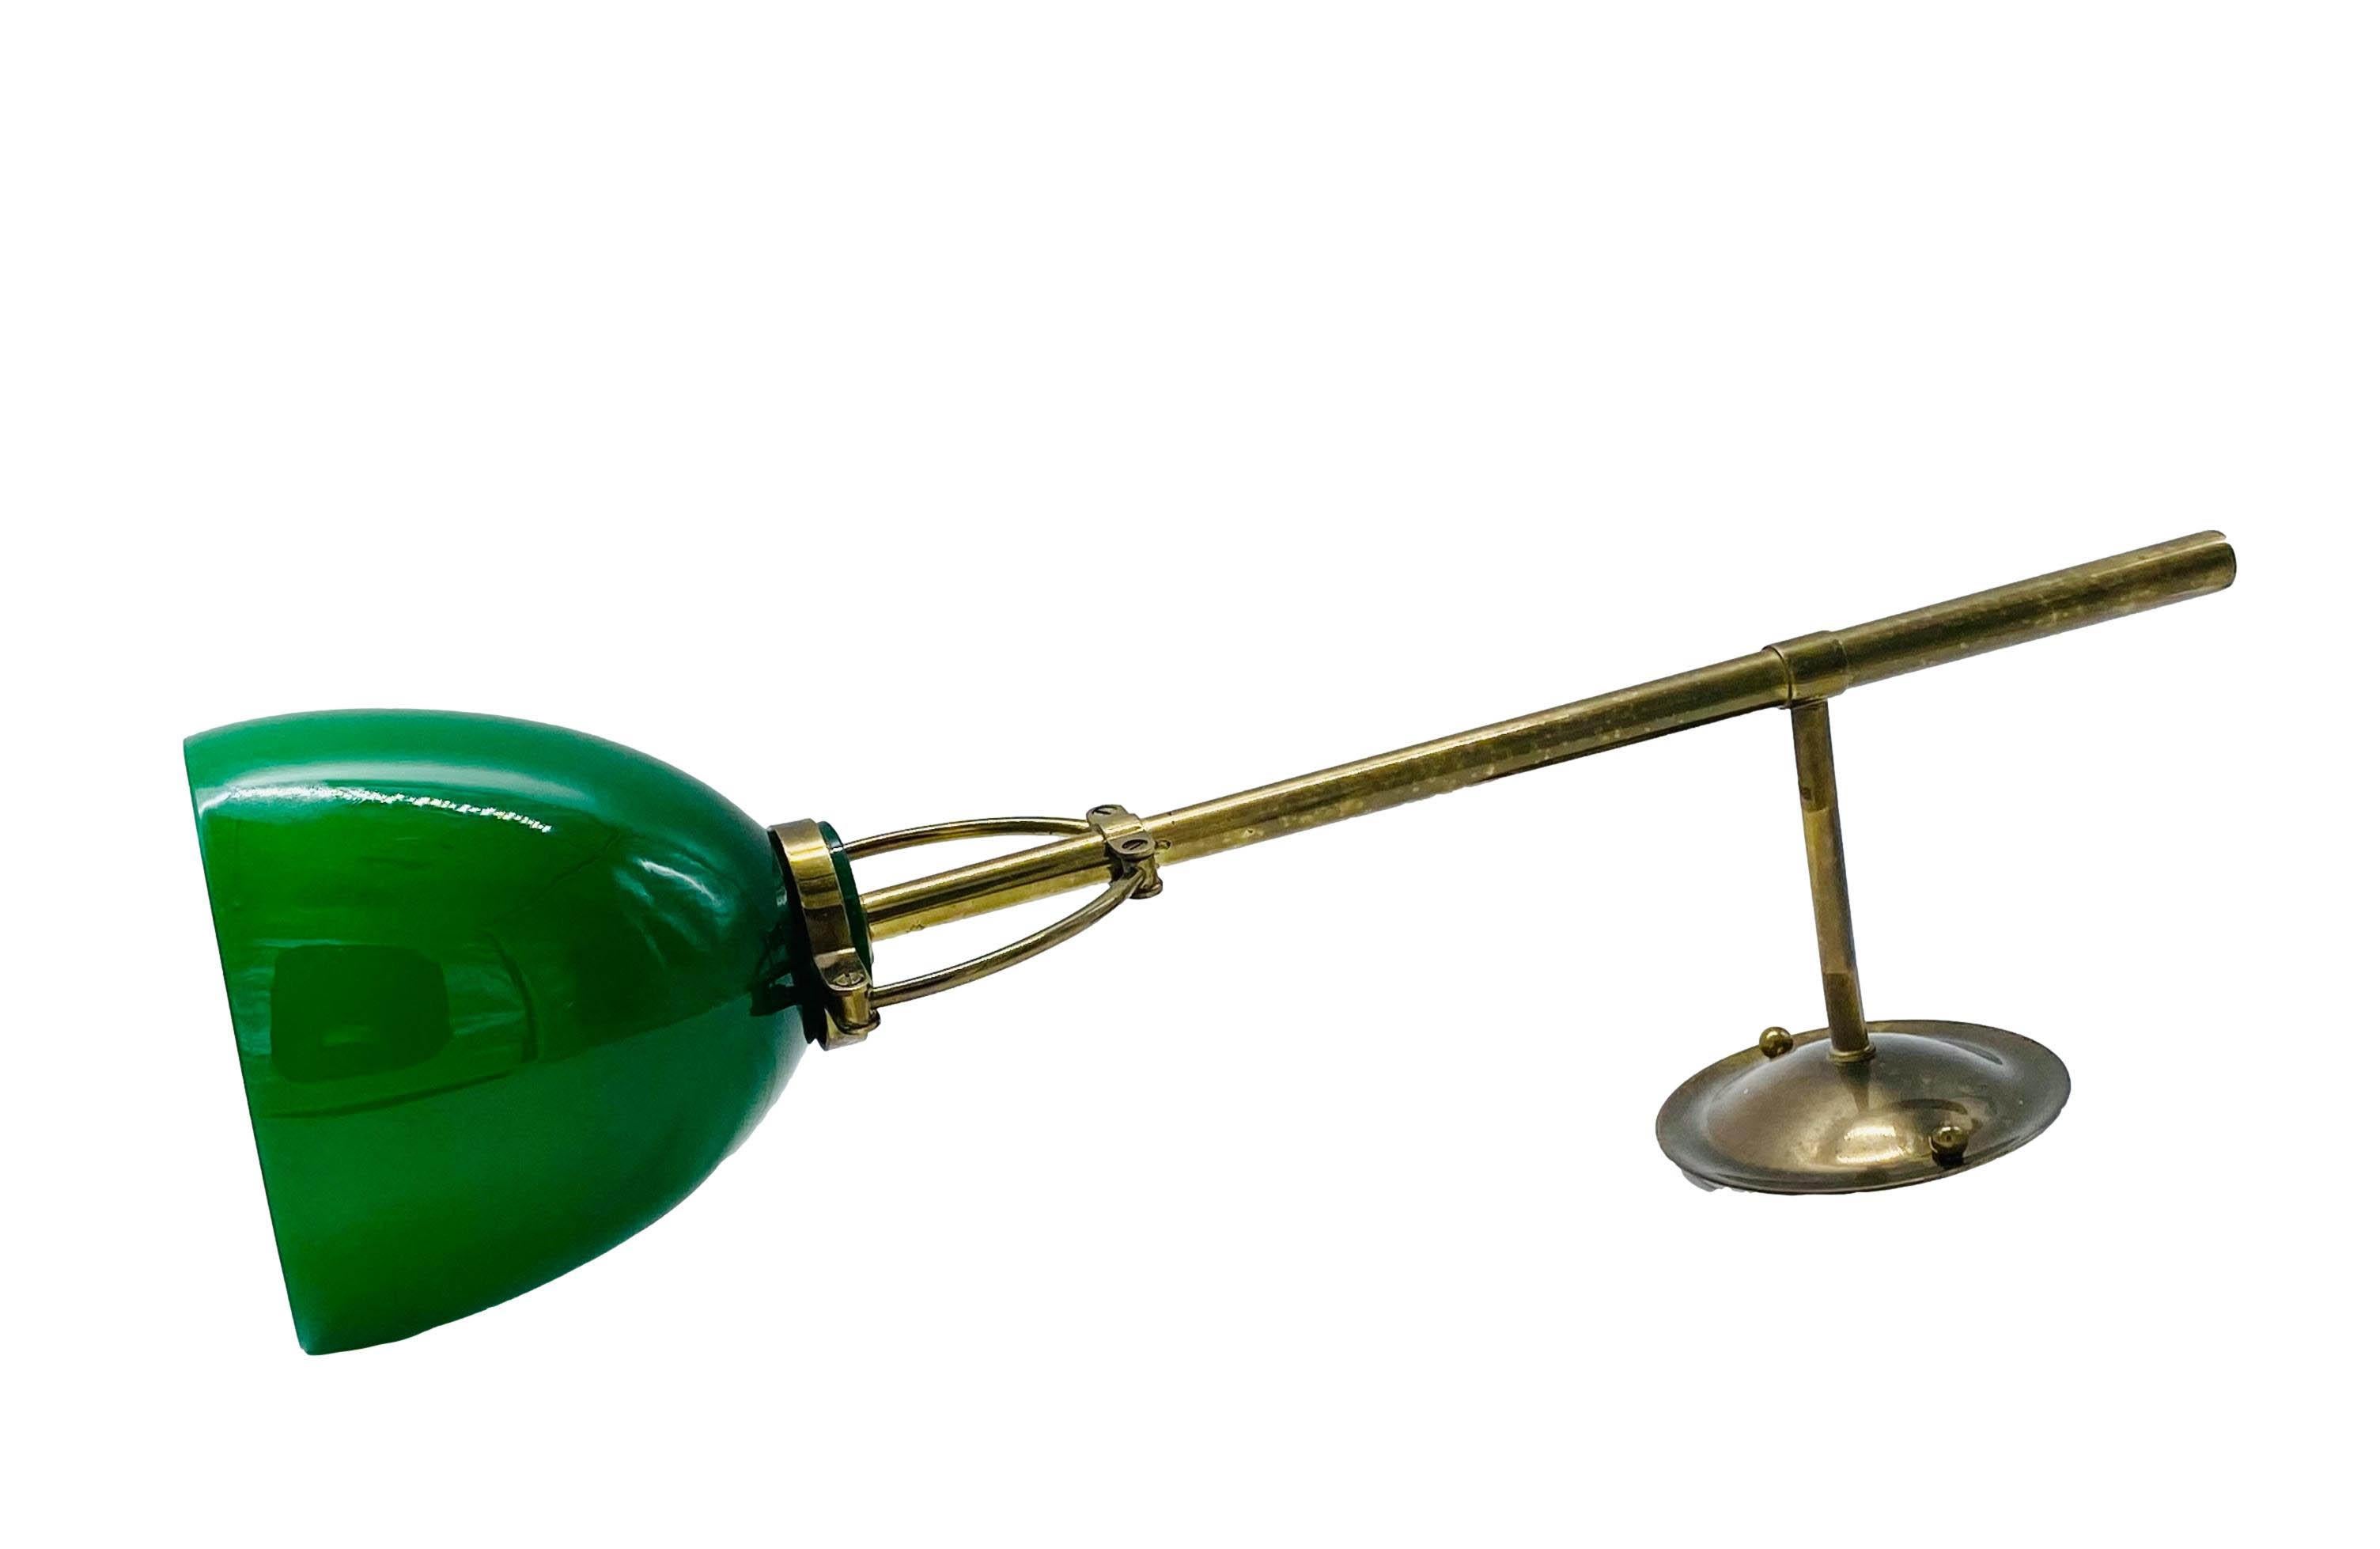 Wall lamp with green glass diffuser and opaline interior, it has a brass stem and a circular base. 
The lamp is made in Italy and dates from the 1950's. 
It can be used as a wall light, picture and art light or vertically as a desk light. Rewired,